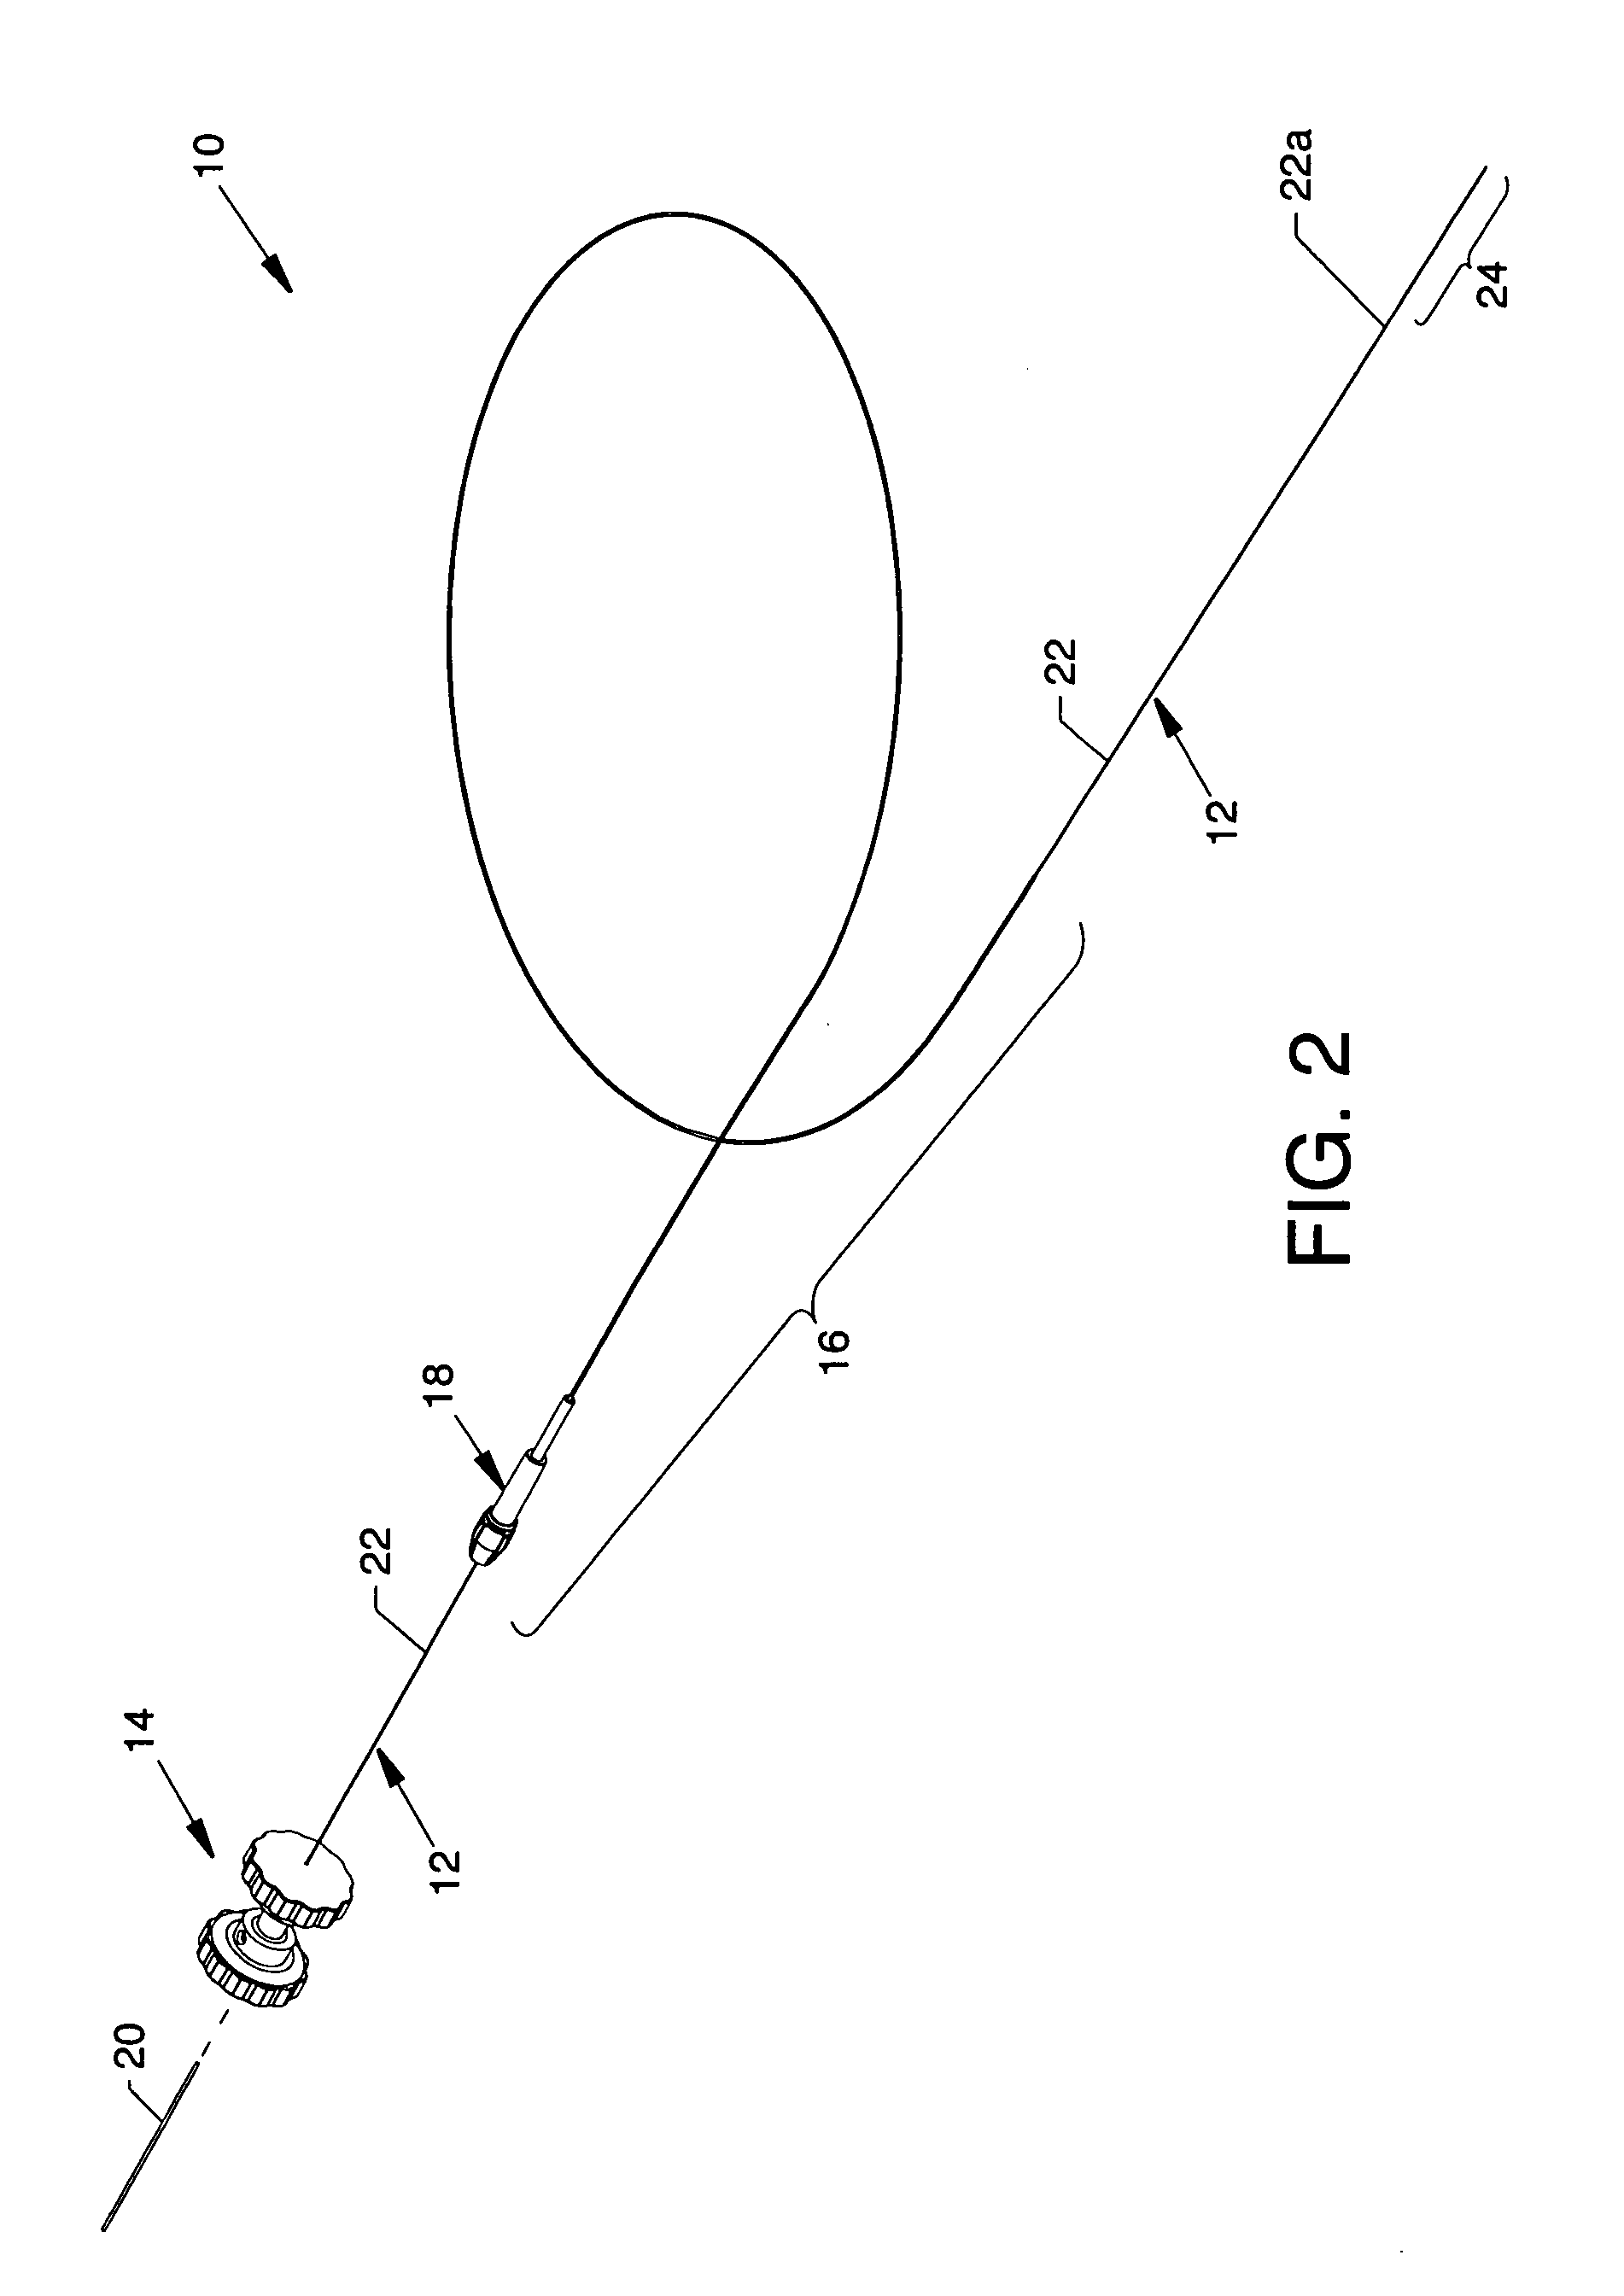 Infusion flow guidewire system